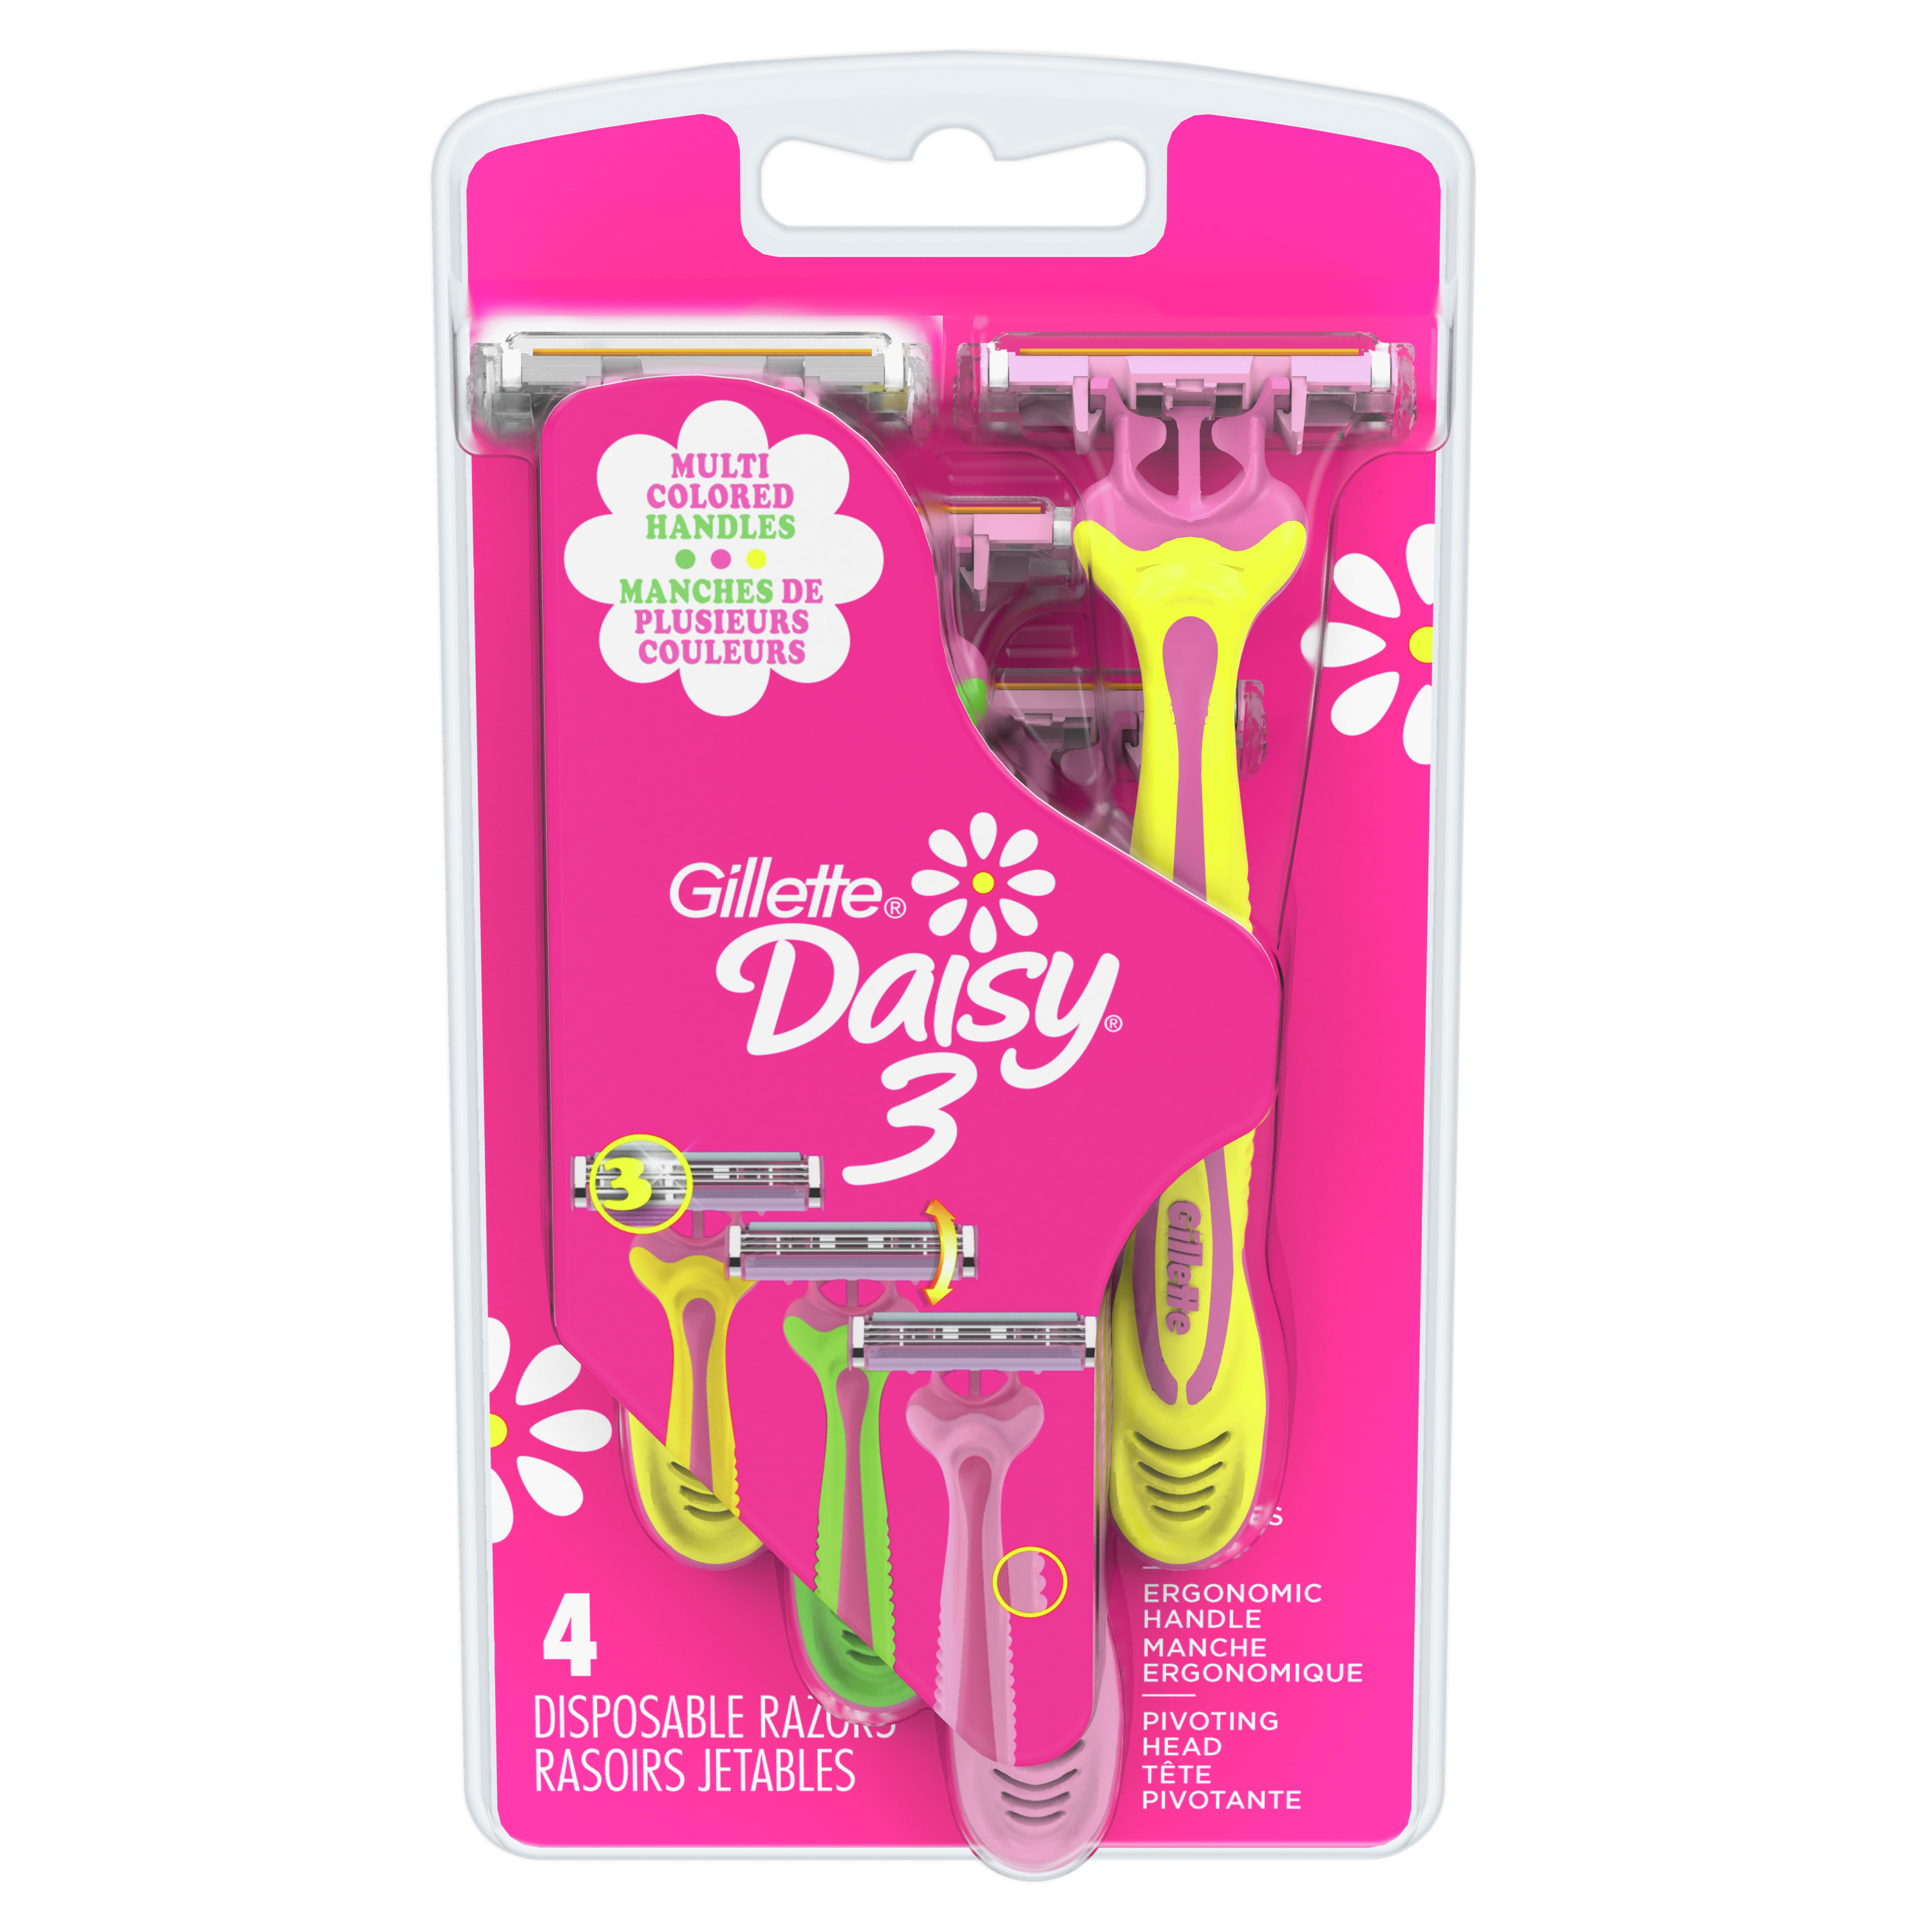 Daisy Gillette Disposable Razors for Women, 3 Bladed, 4 Ct - image 2 of 7